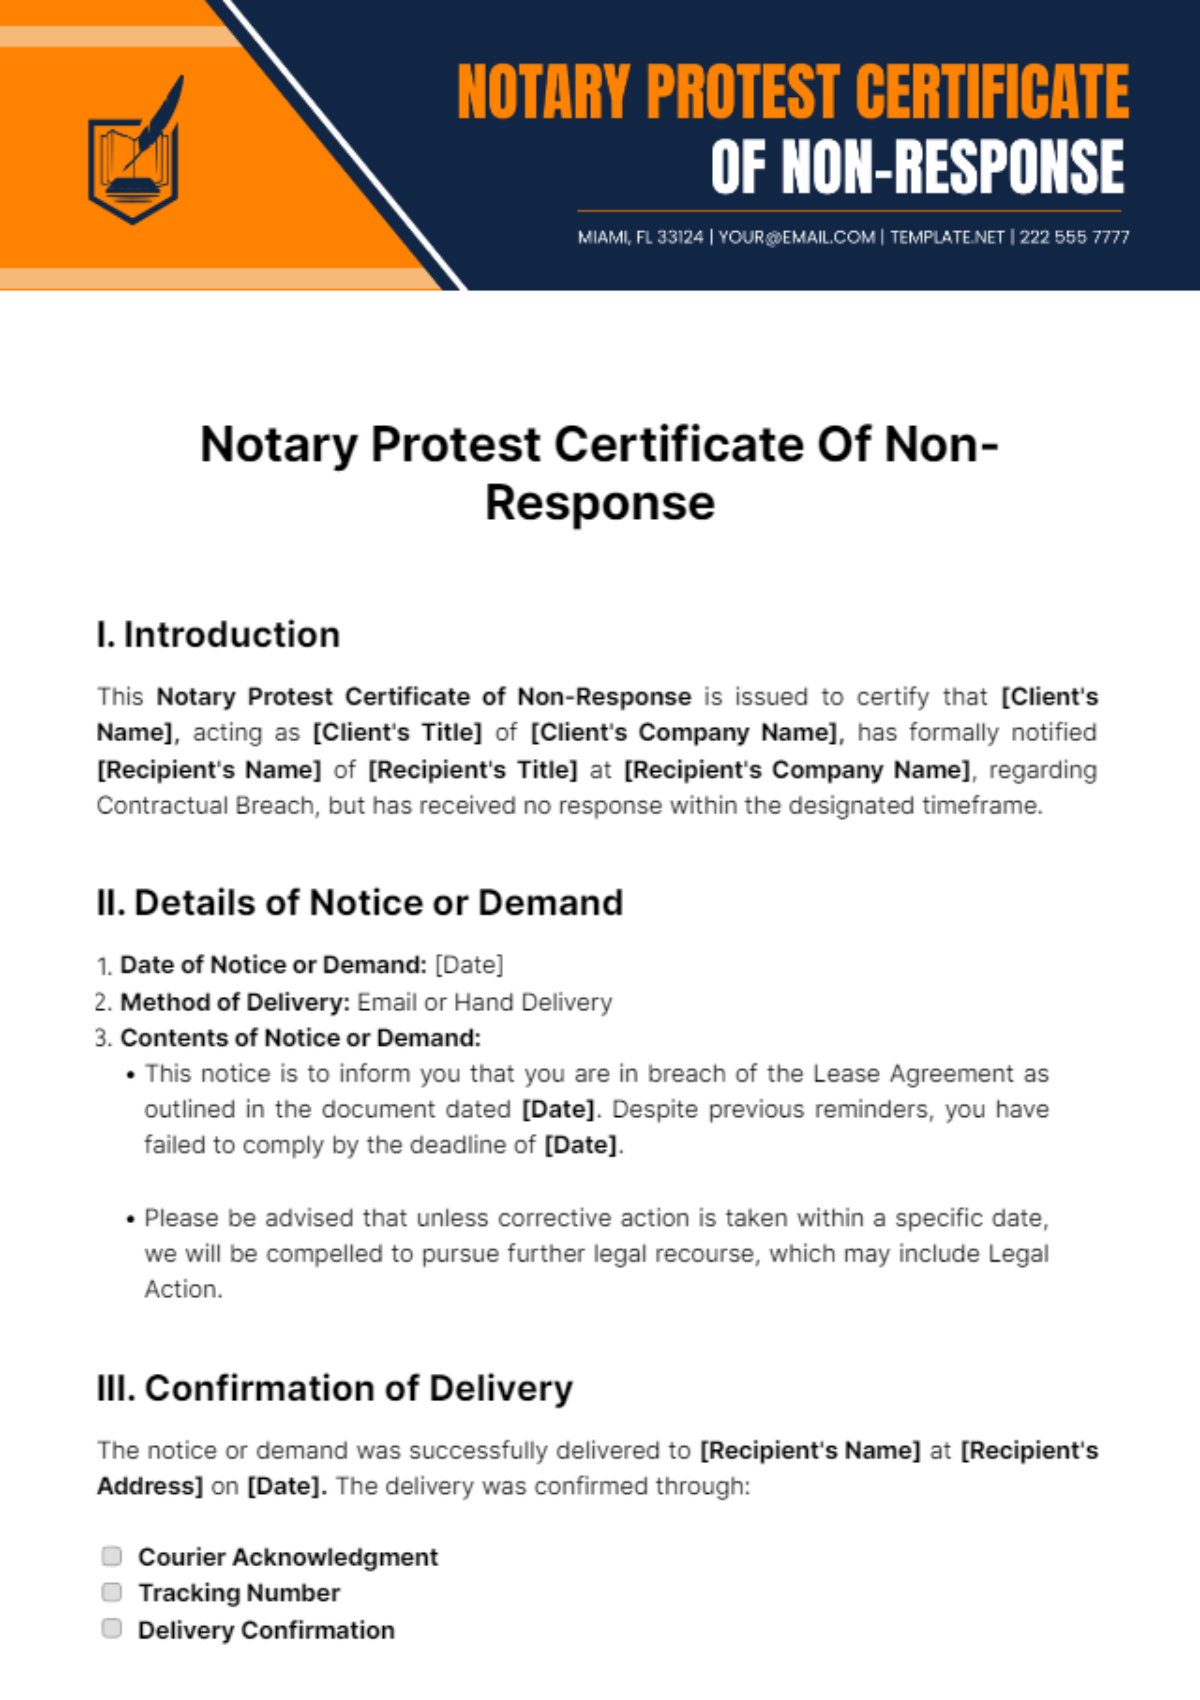 Notary Protest Certificate Of Non-Response Template